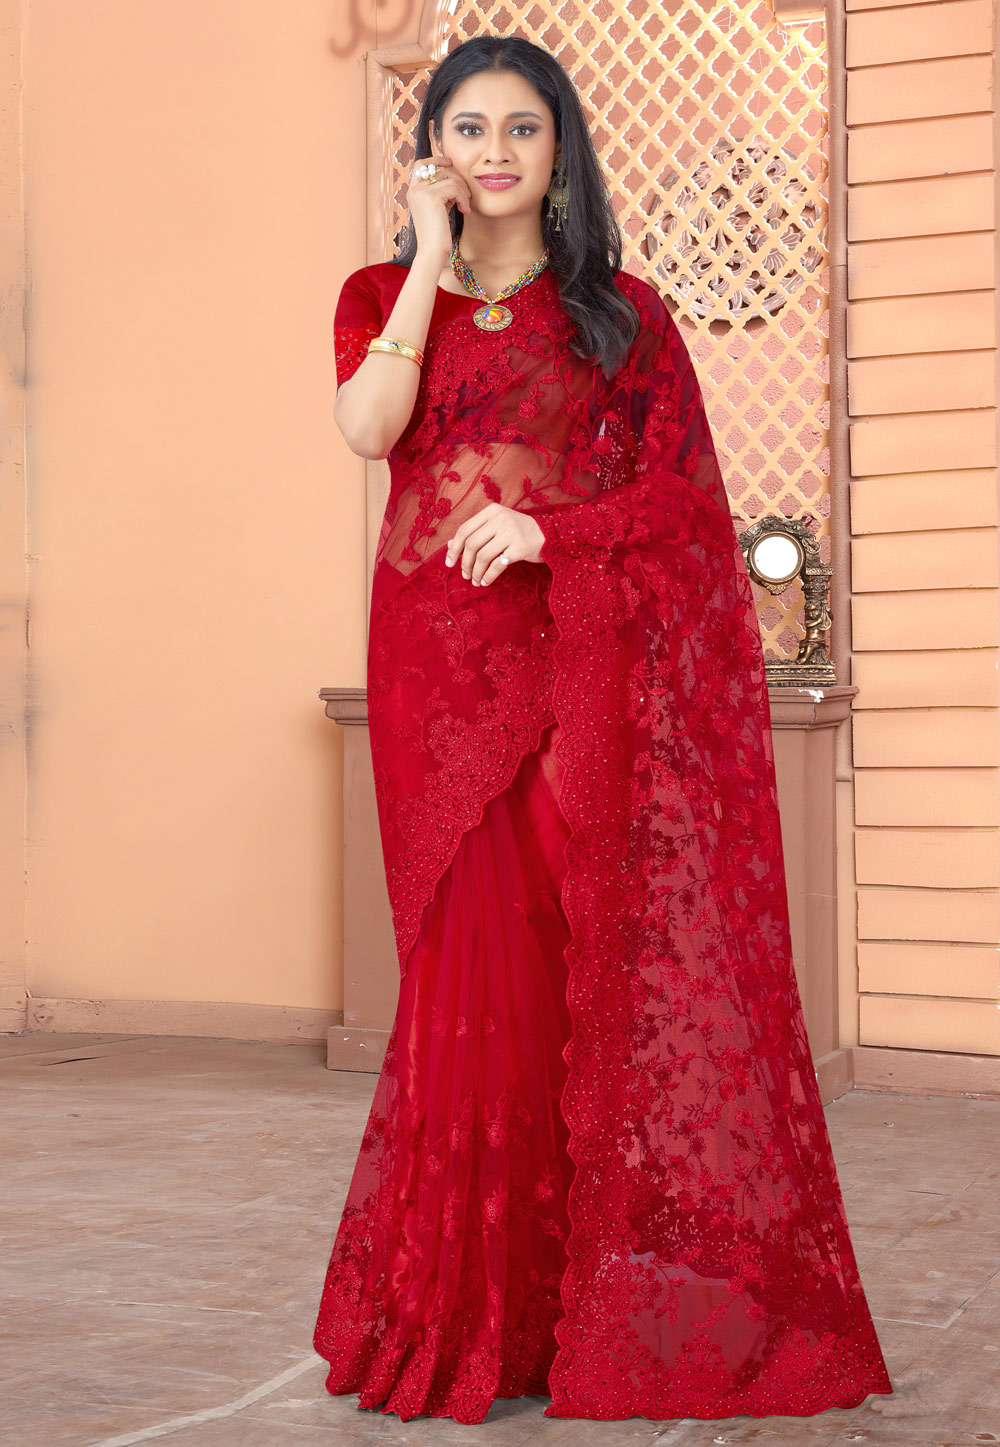 Red Party Wear Saree for unmarried girl - Designerkloth